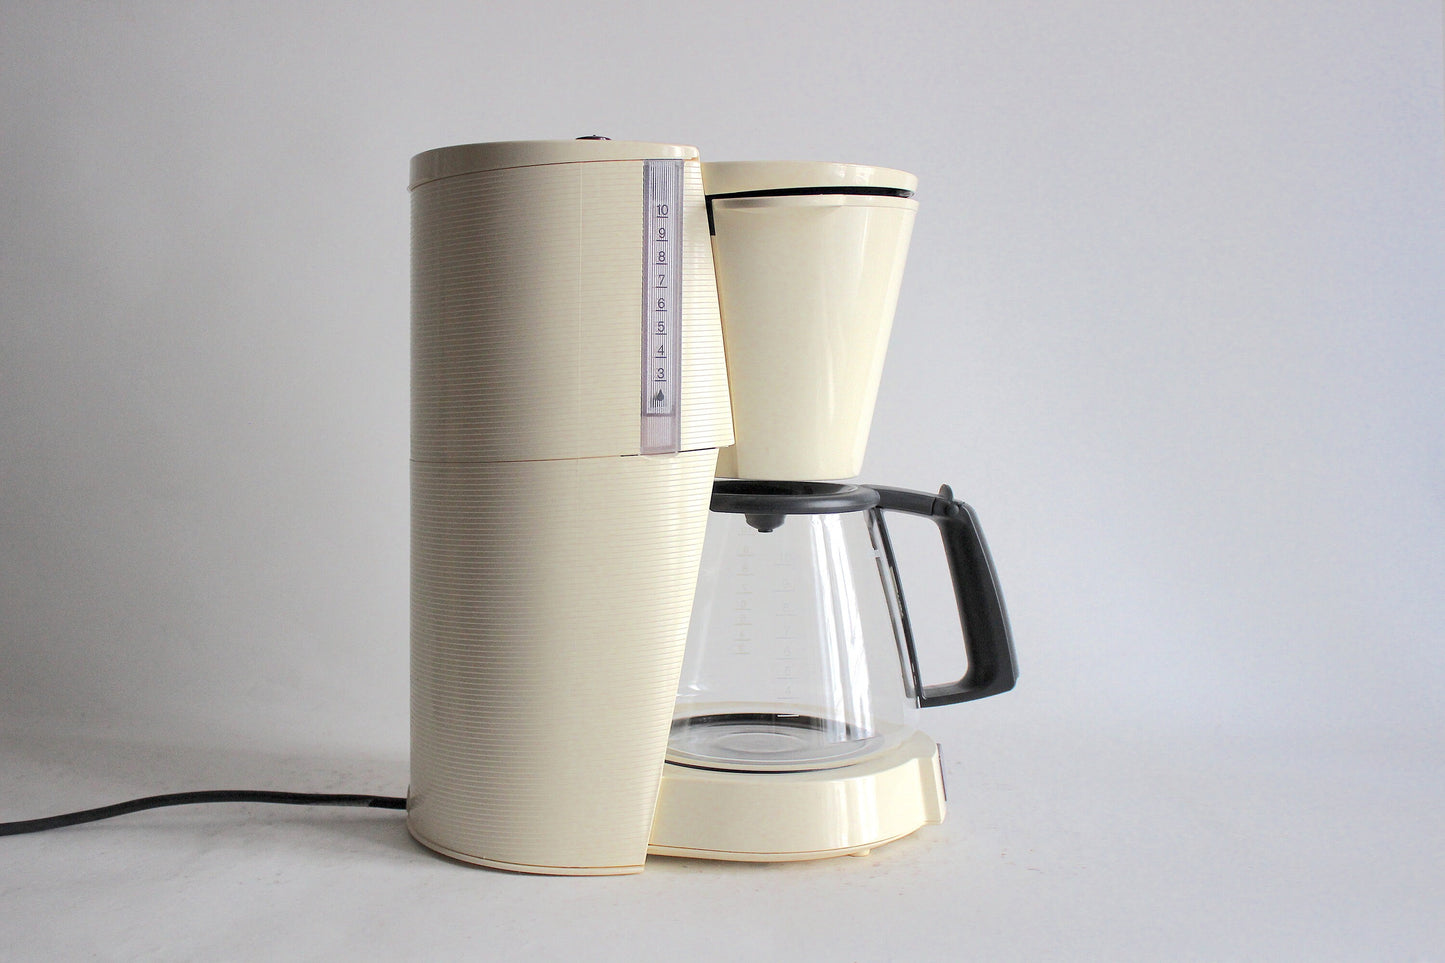 BRAUN Aroma Select FK130 "Living Colors" Vanilla Filter coffee maker. Germany 1990s